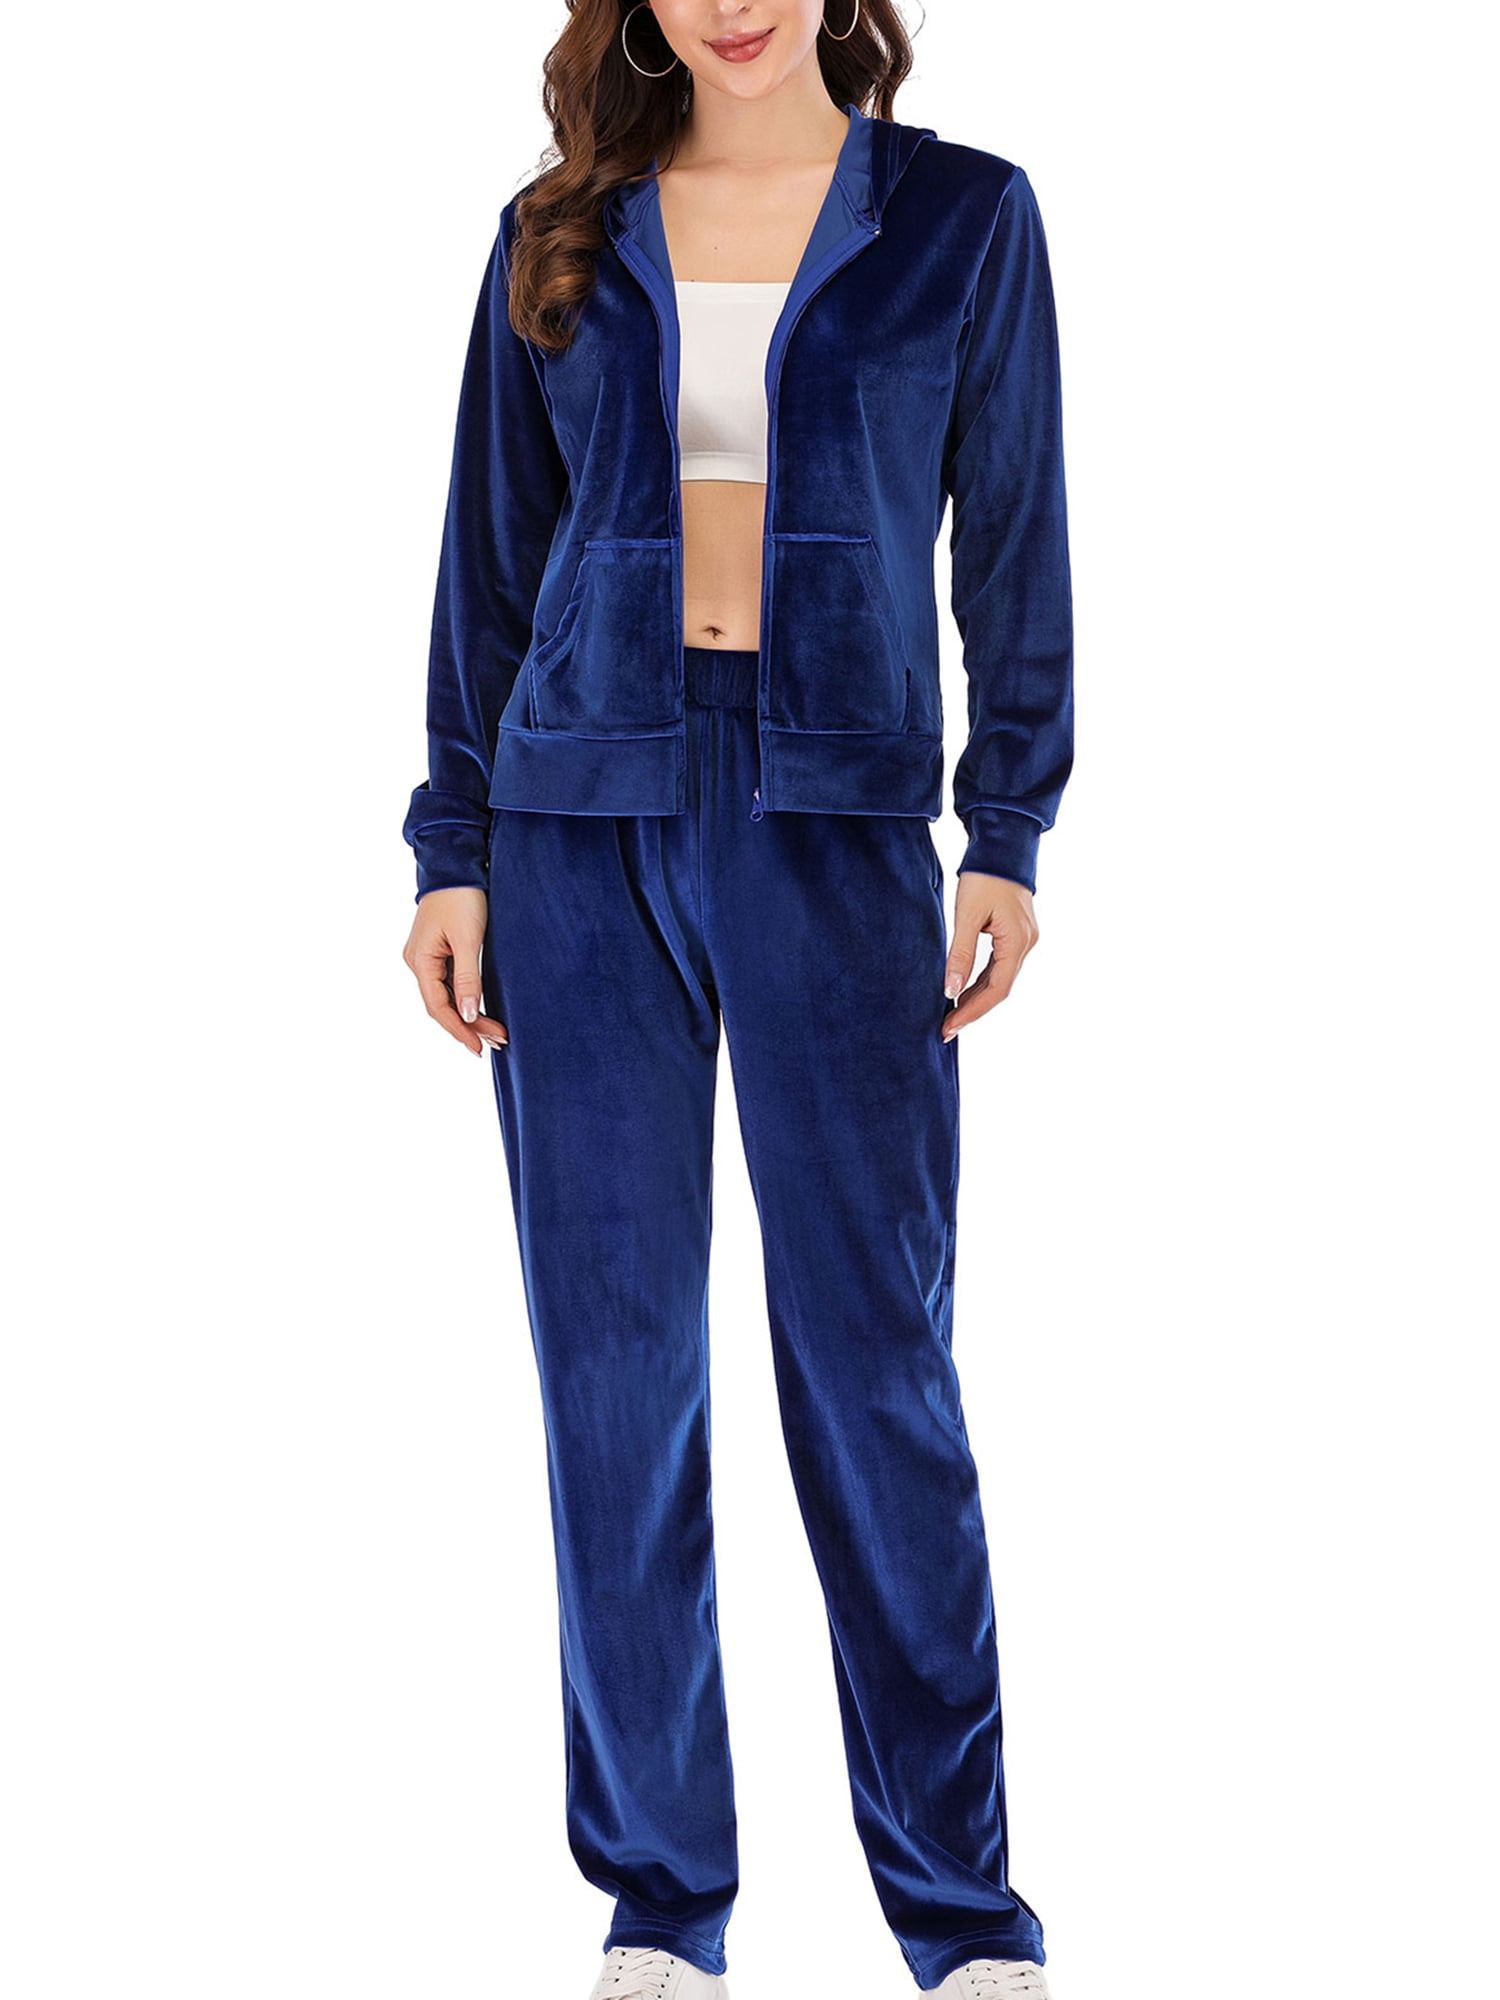 New Womens Ladies Velour Full Tracksuit Jogging HOODED Sport Gym Plus Sizes 8-24 